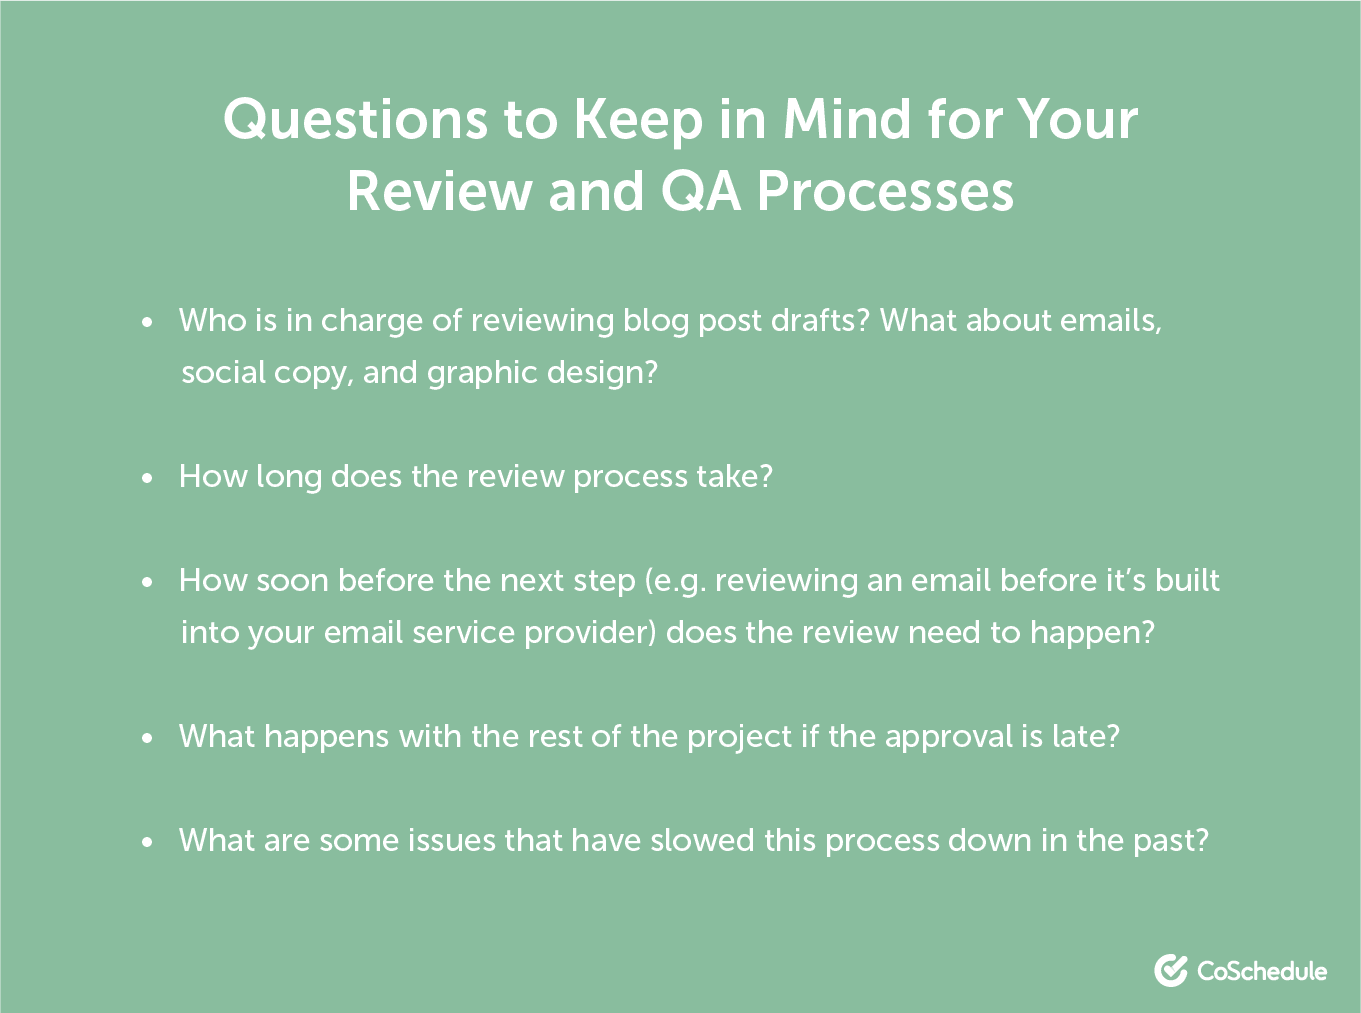 Questions to consider for review and QA processes